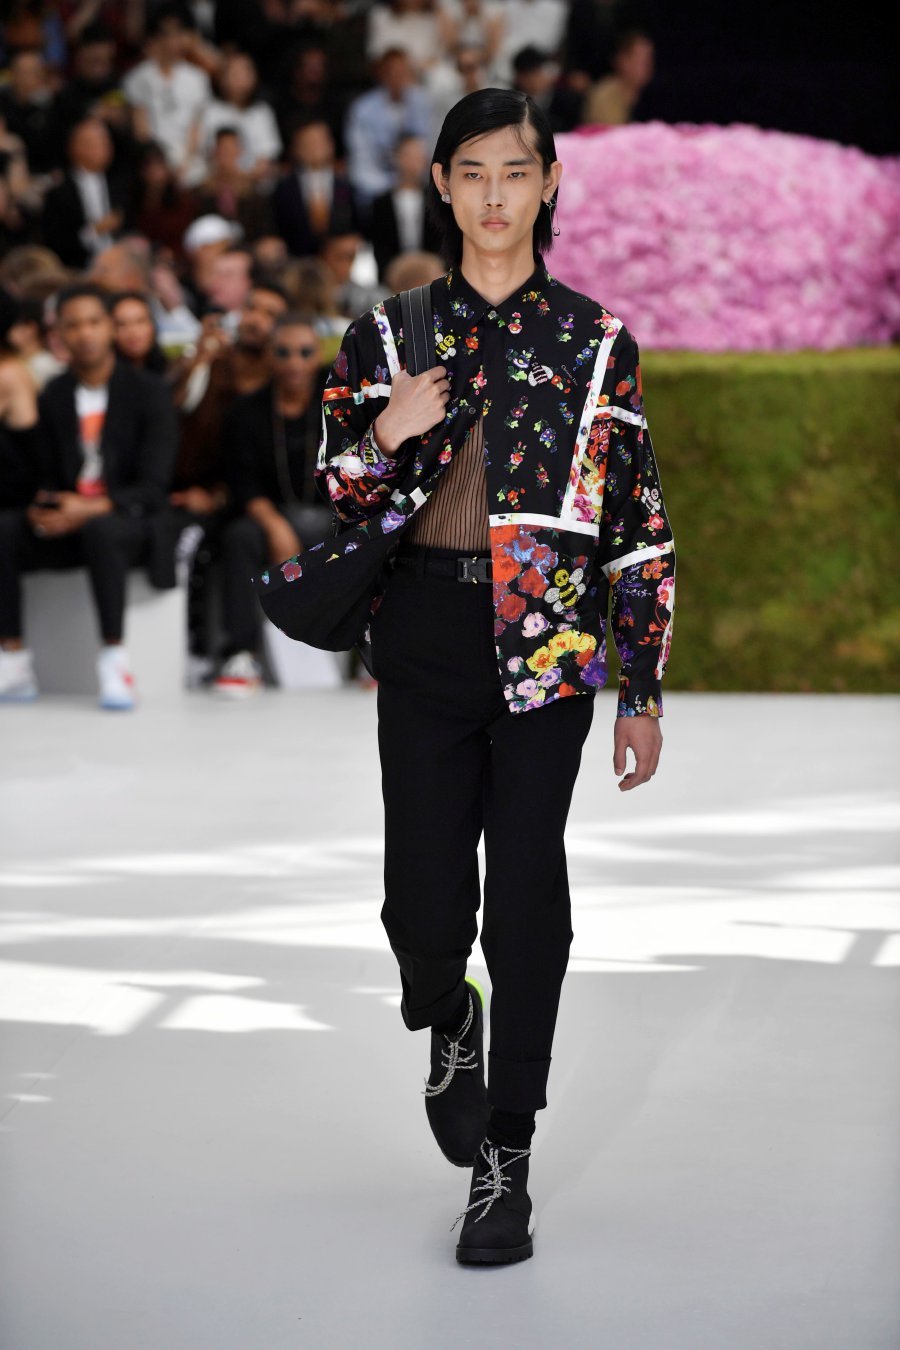 Flower power takes hold at Dior in break from menswear past